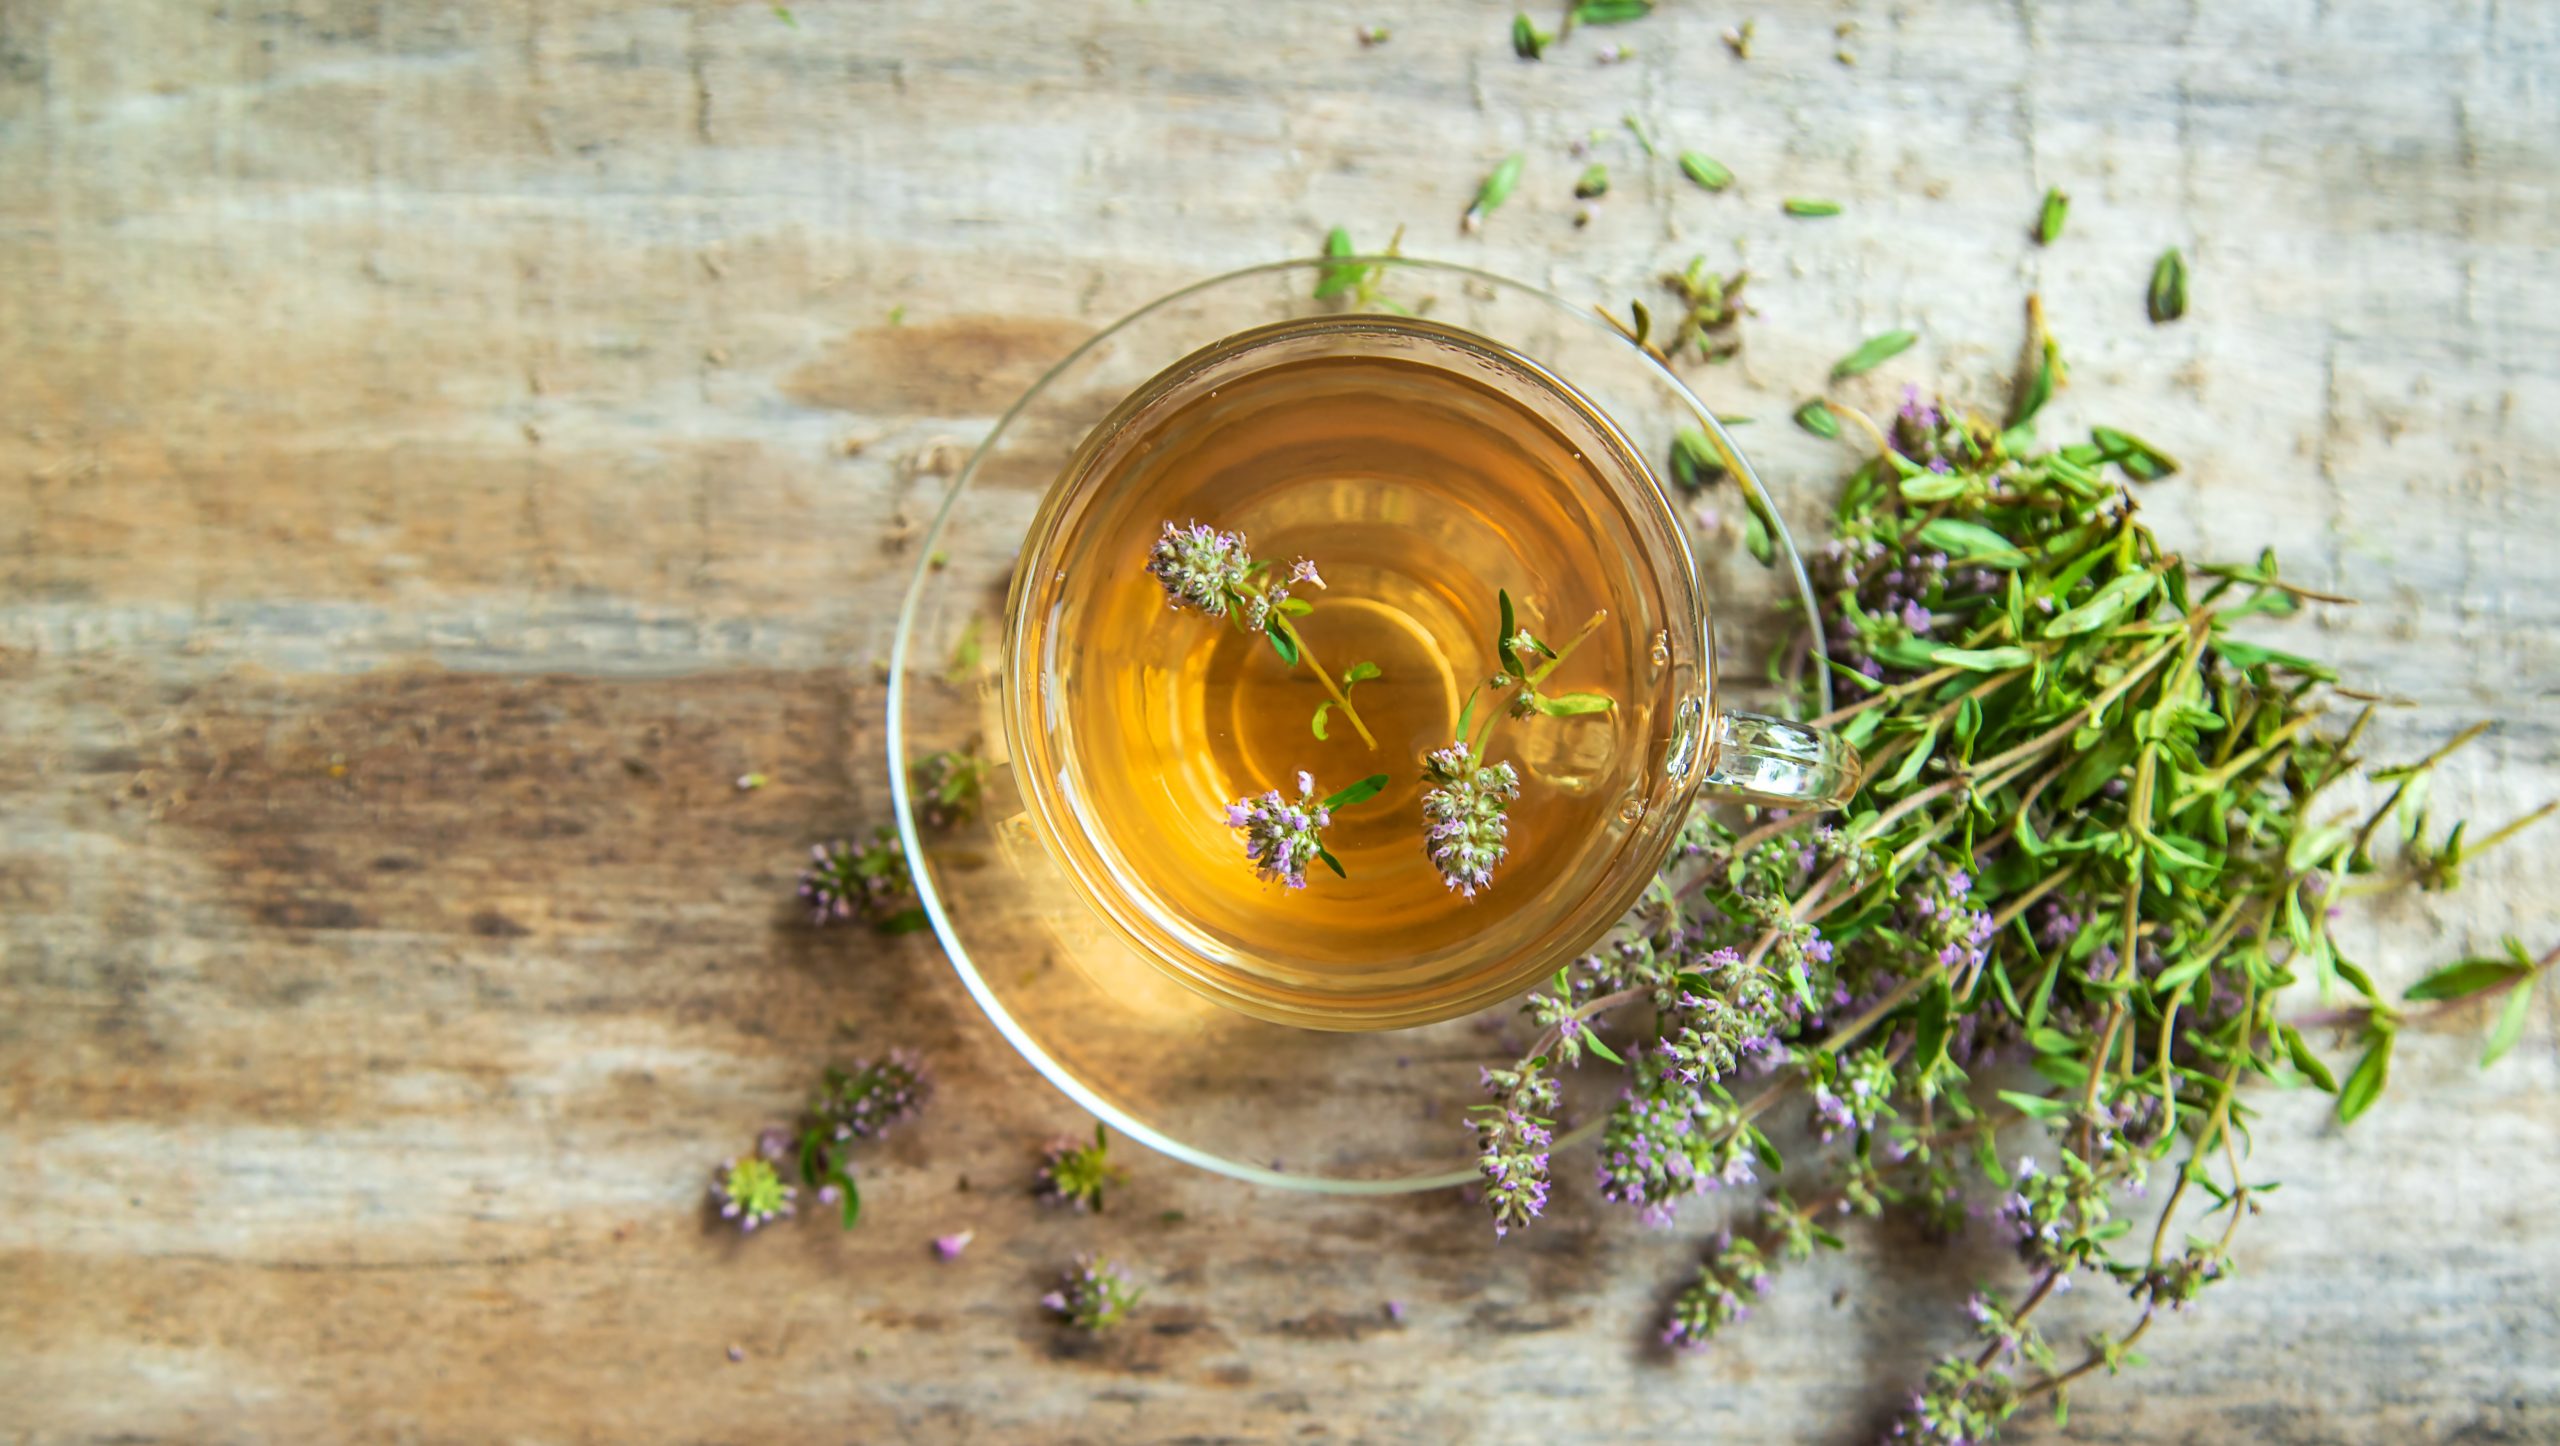 thyme-tea-in-a-cup-selective-focus-2022-10-28-21-38-52-utc-scaled.jpg